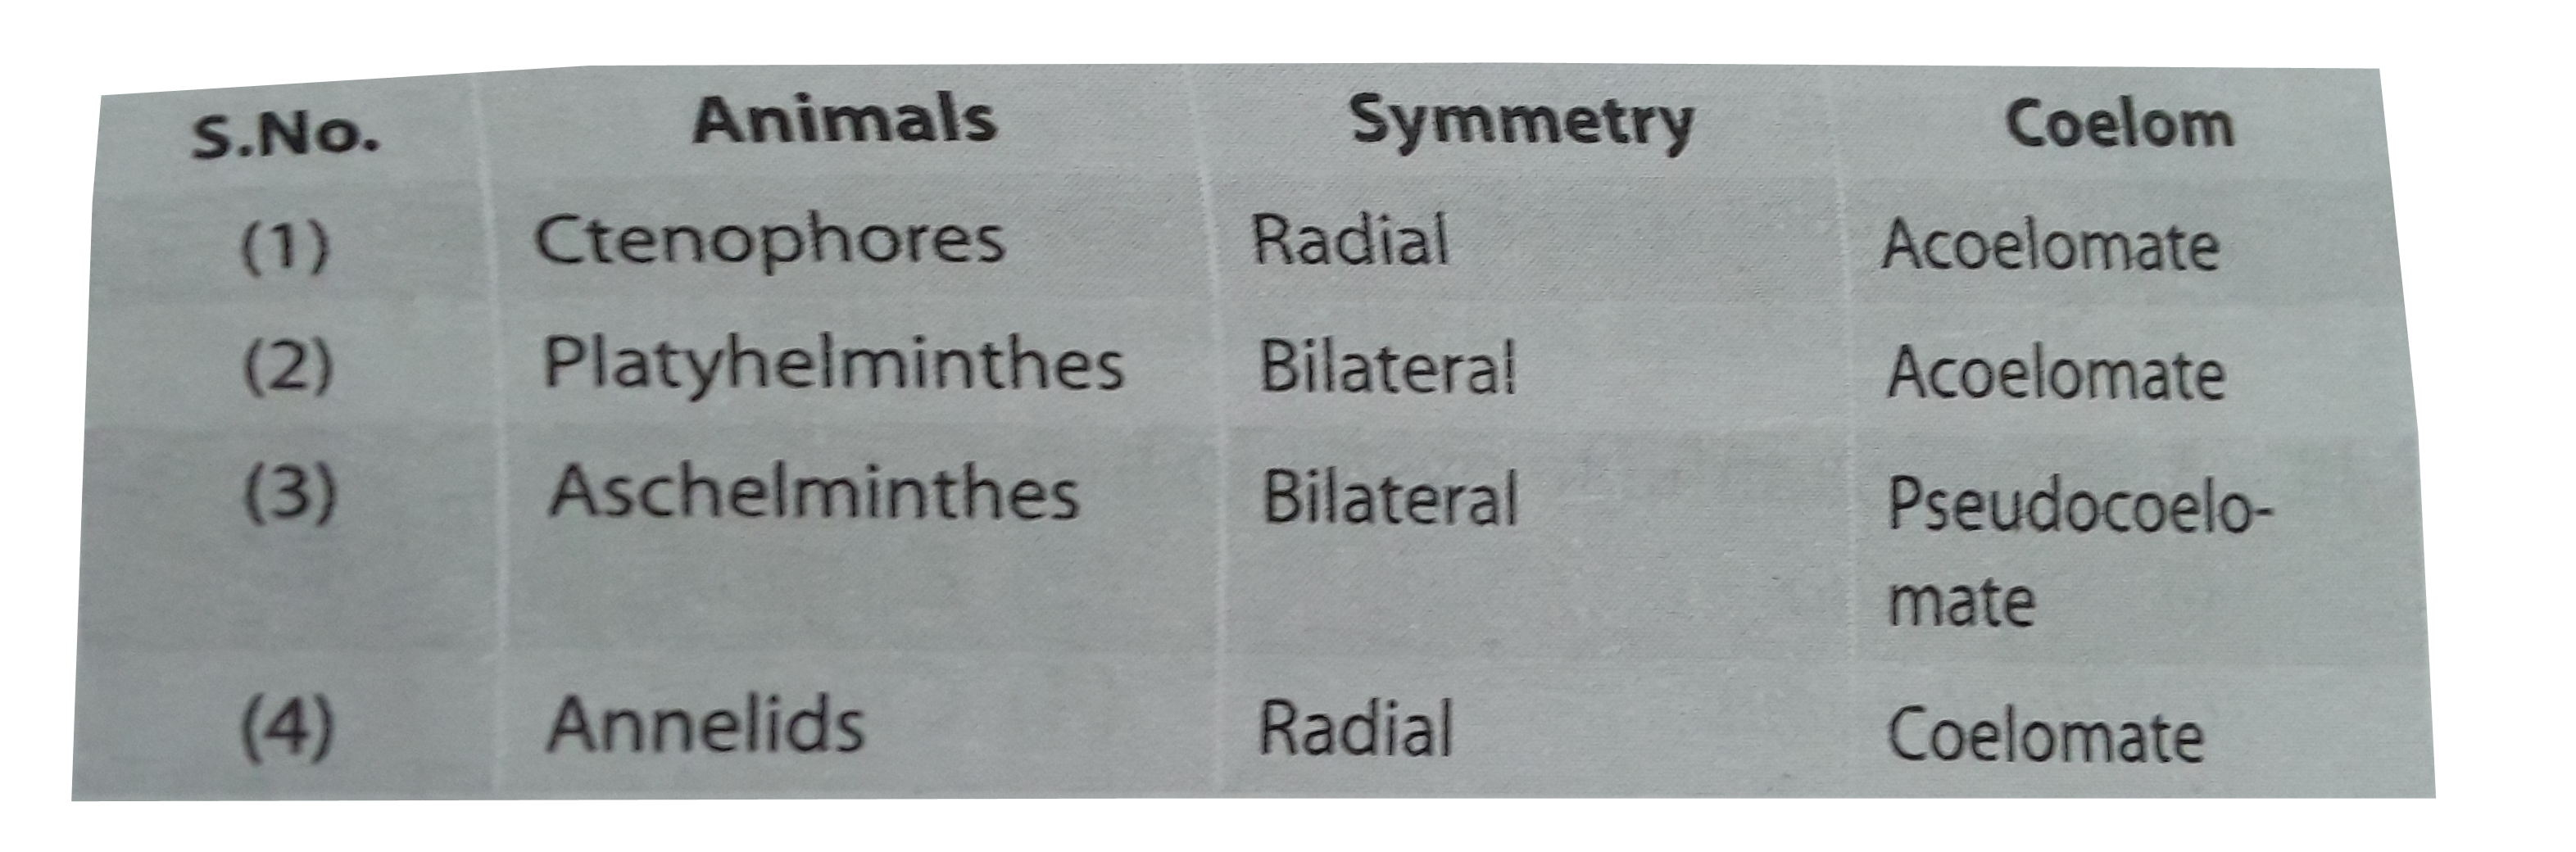 Select incorrect matching of animals, their body symmetry , and coelom.